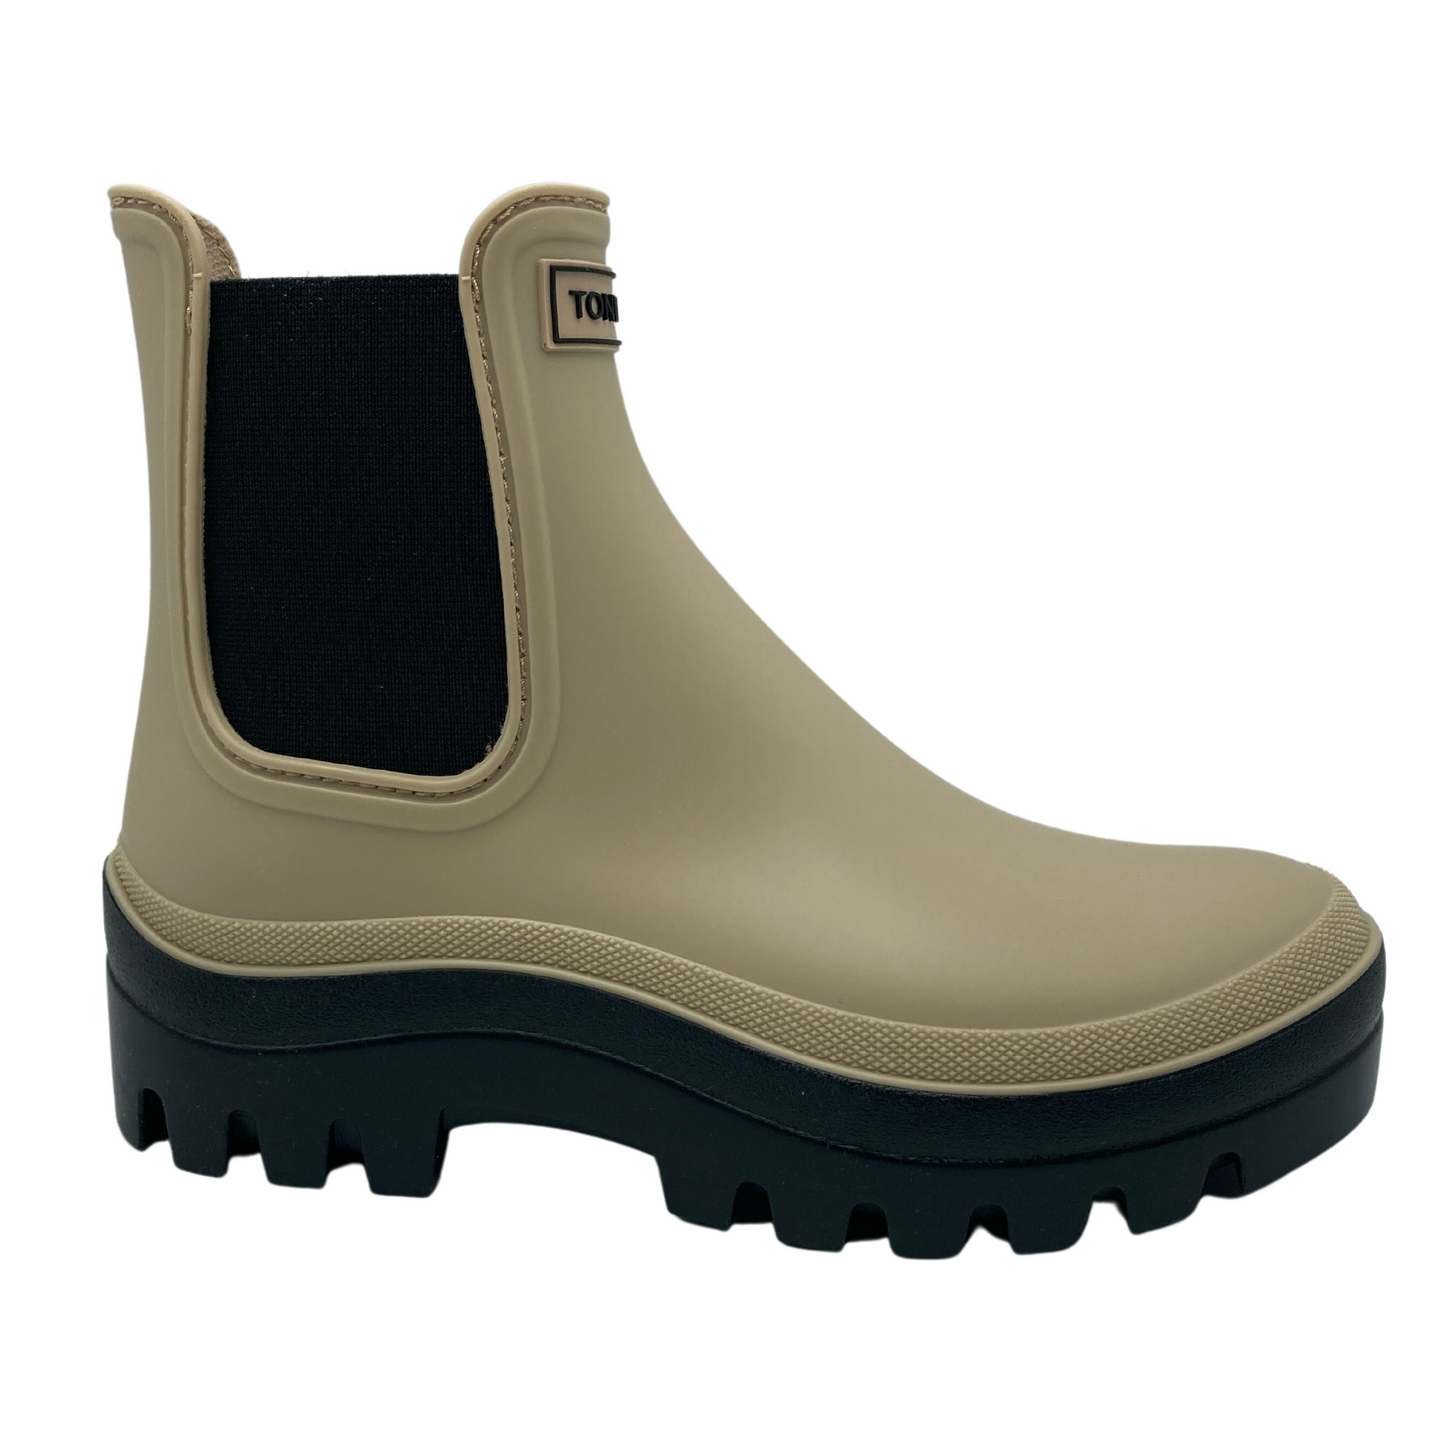 Right facing view of beige rubber chelsea boot with black platform sole and elastic sides